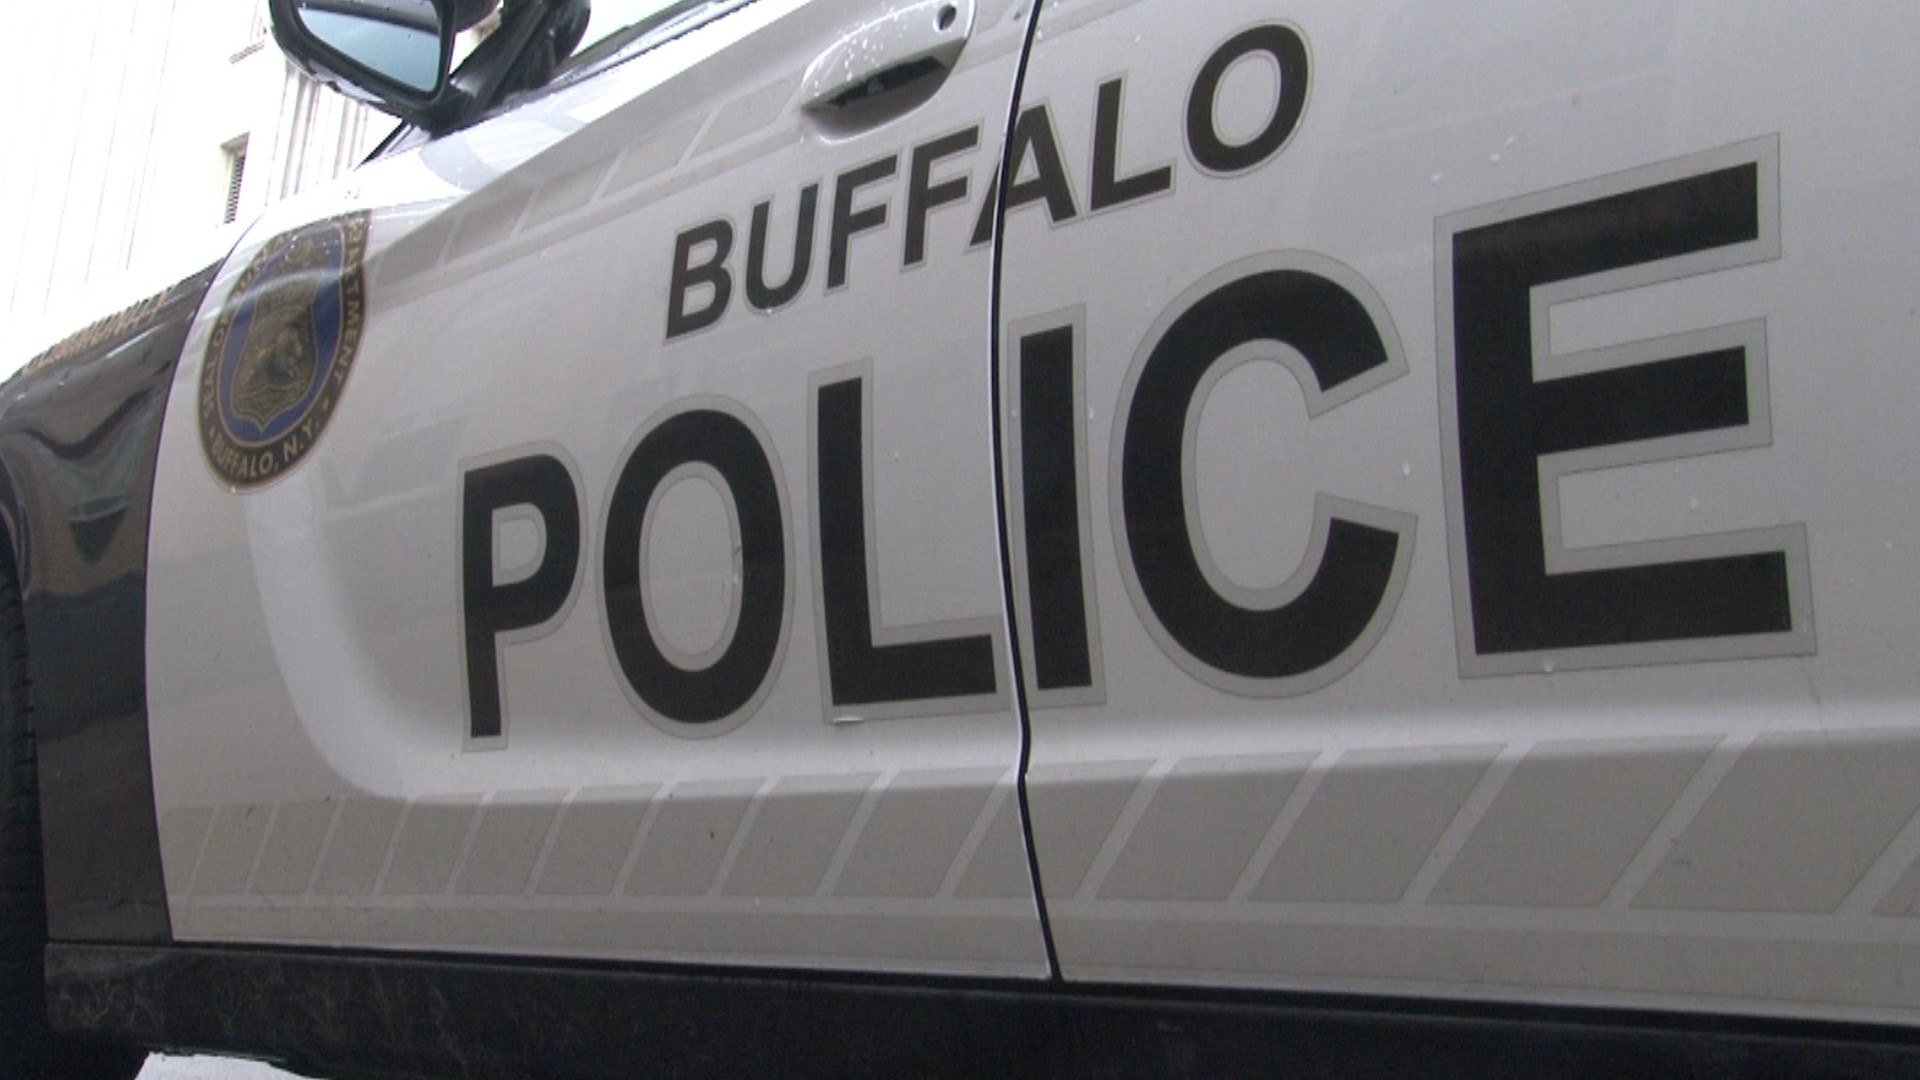 The 37-year-old was taken to Erie County Medical Center to be treated for her injuries, according to a spokesperson for the Buffalo Police Department.